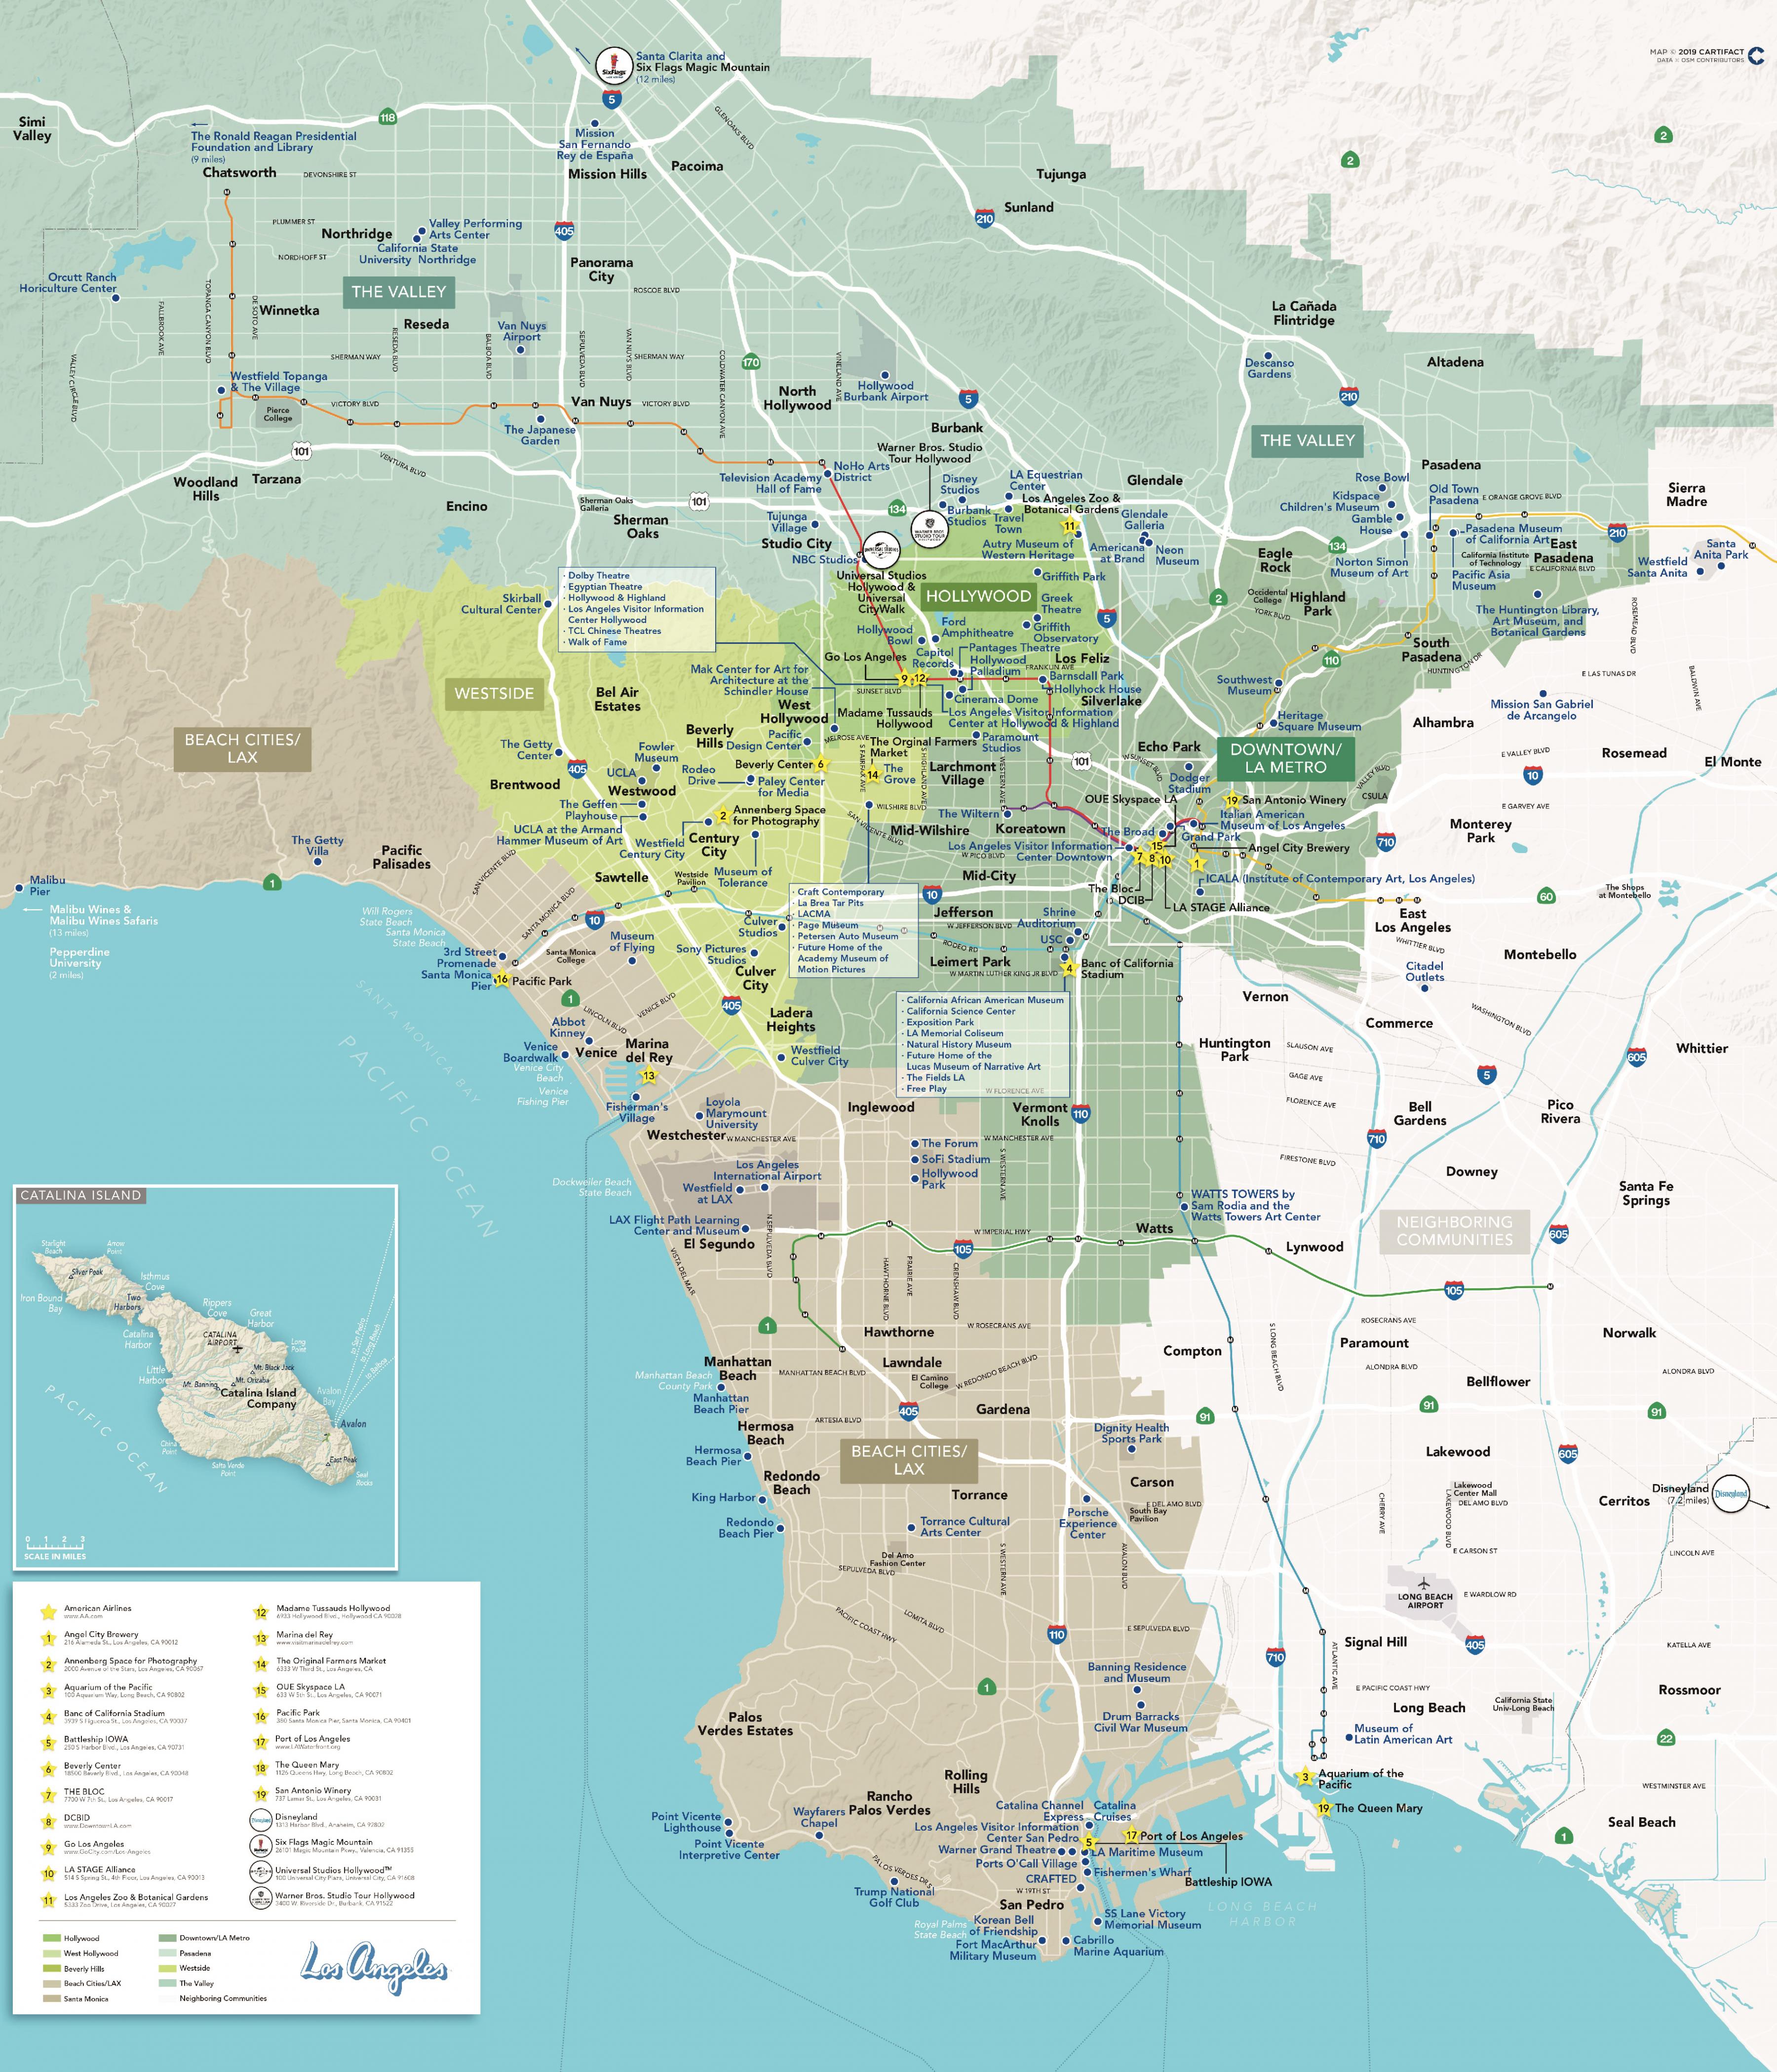 detailed-map-of-los-angeles-detailed-map-of-los-angeles-california